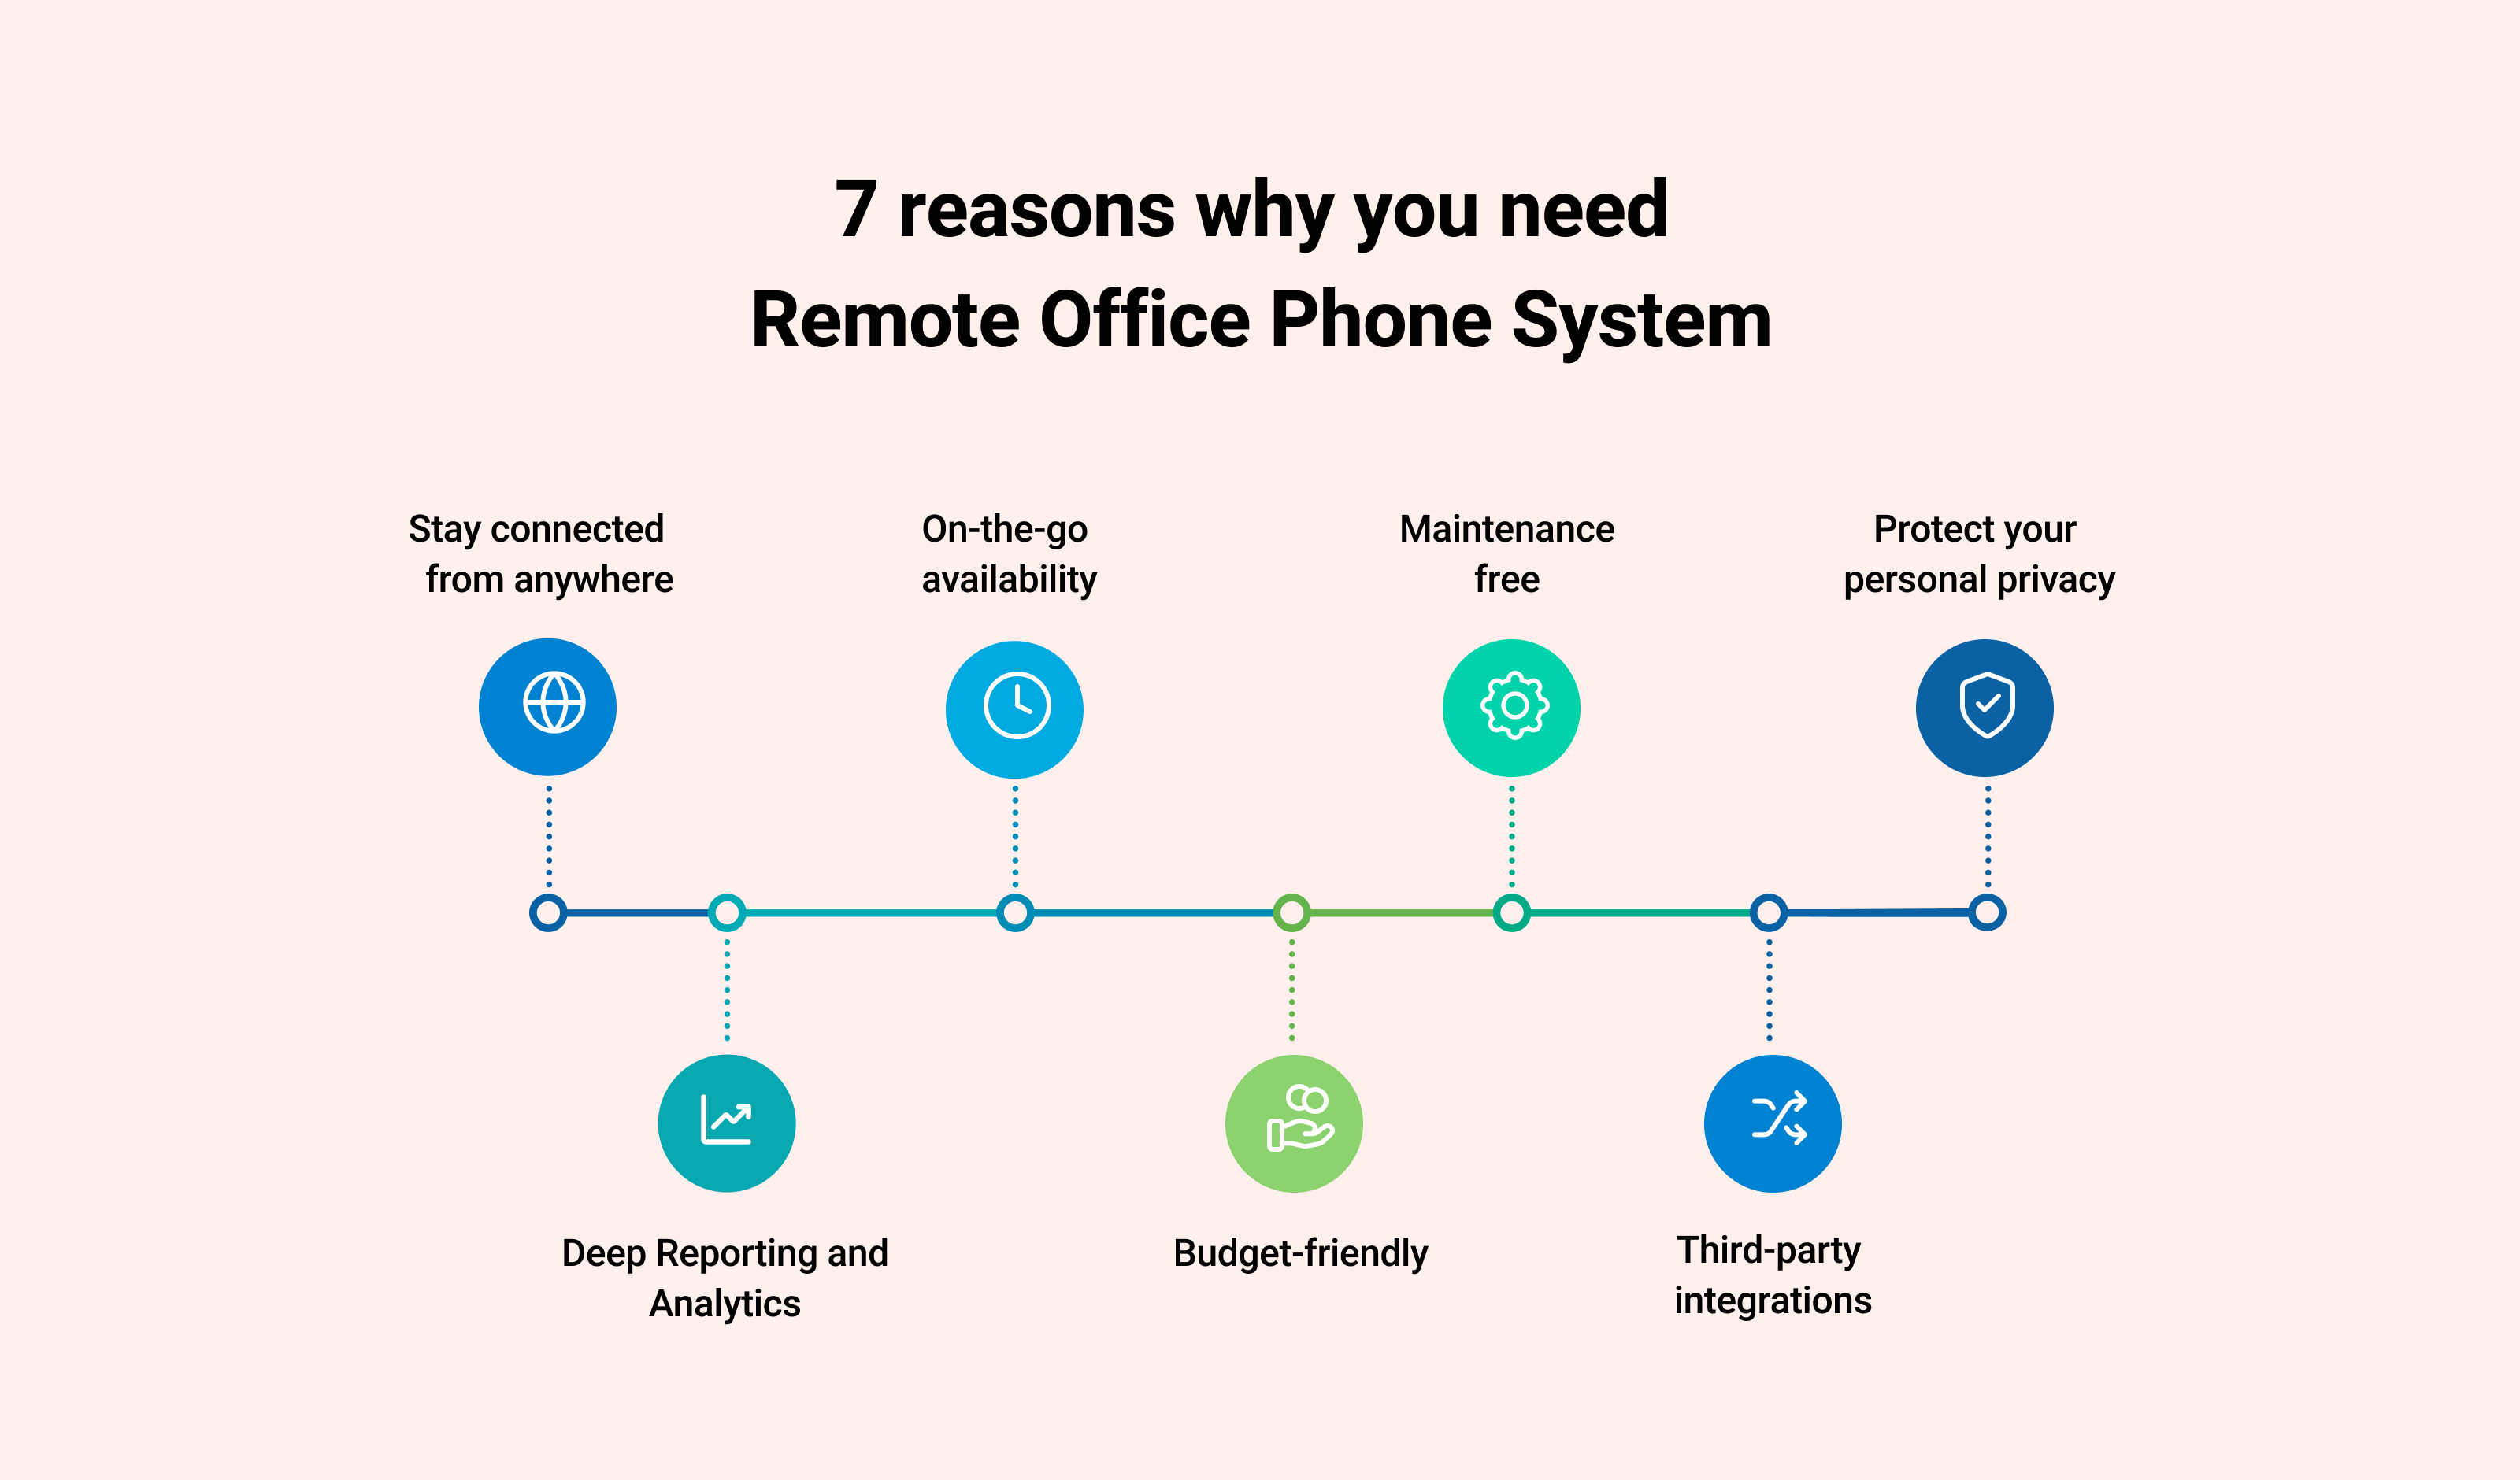 7 Reasons Why You Need a Remote Office Phone System: